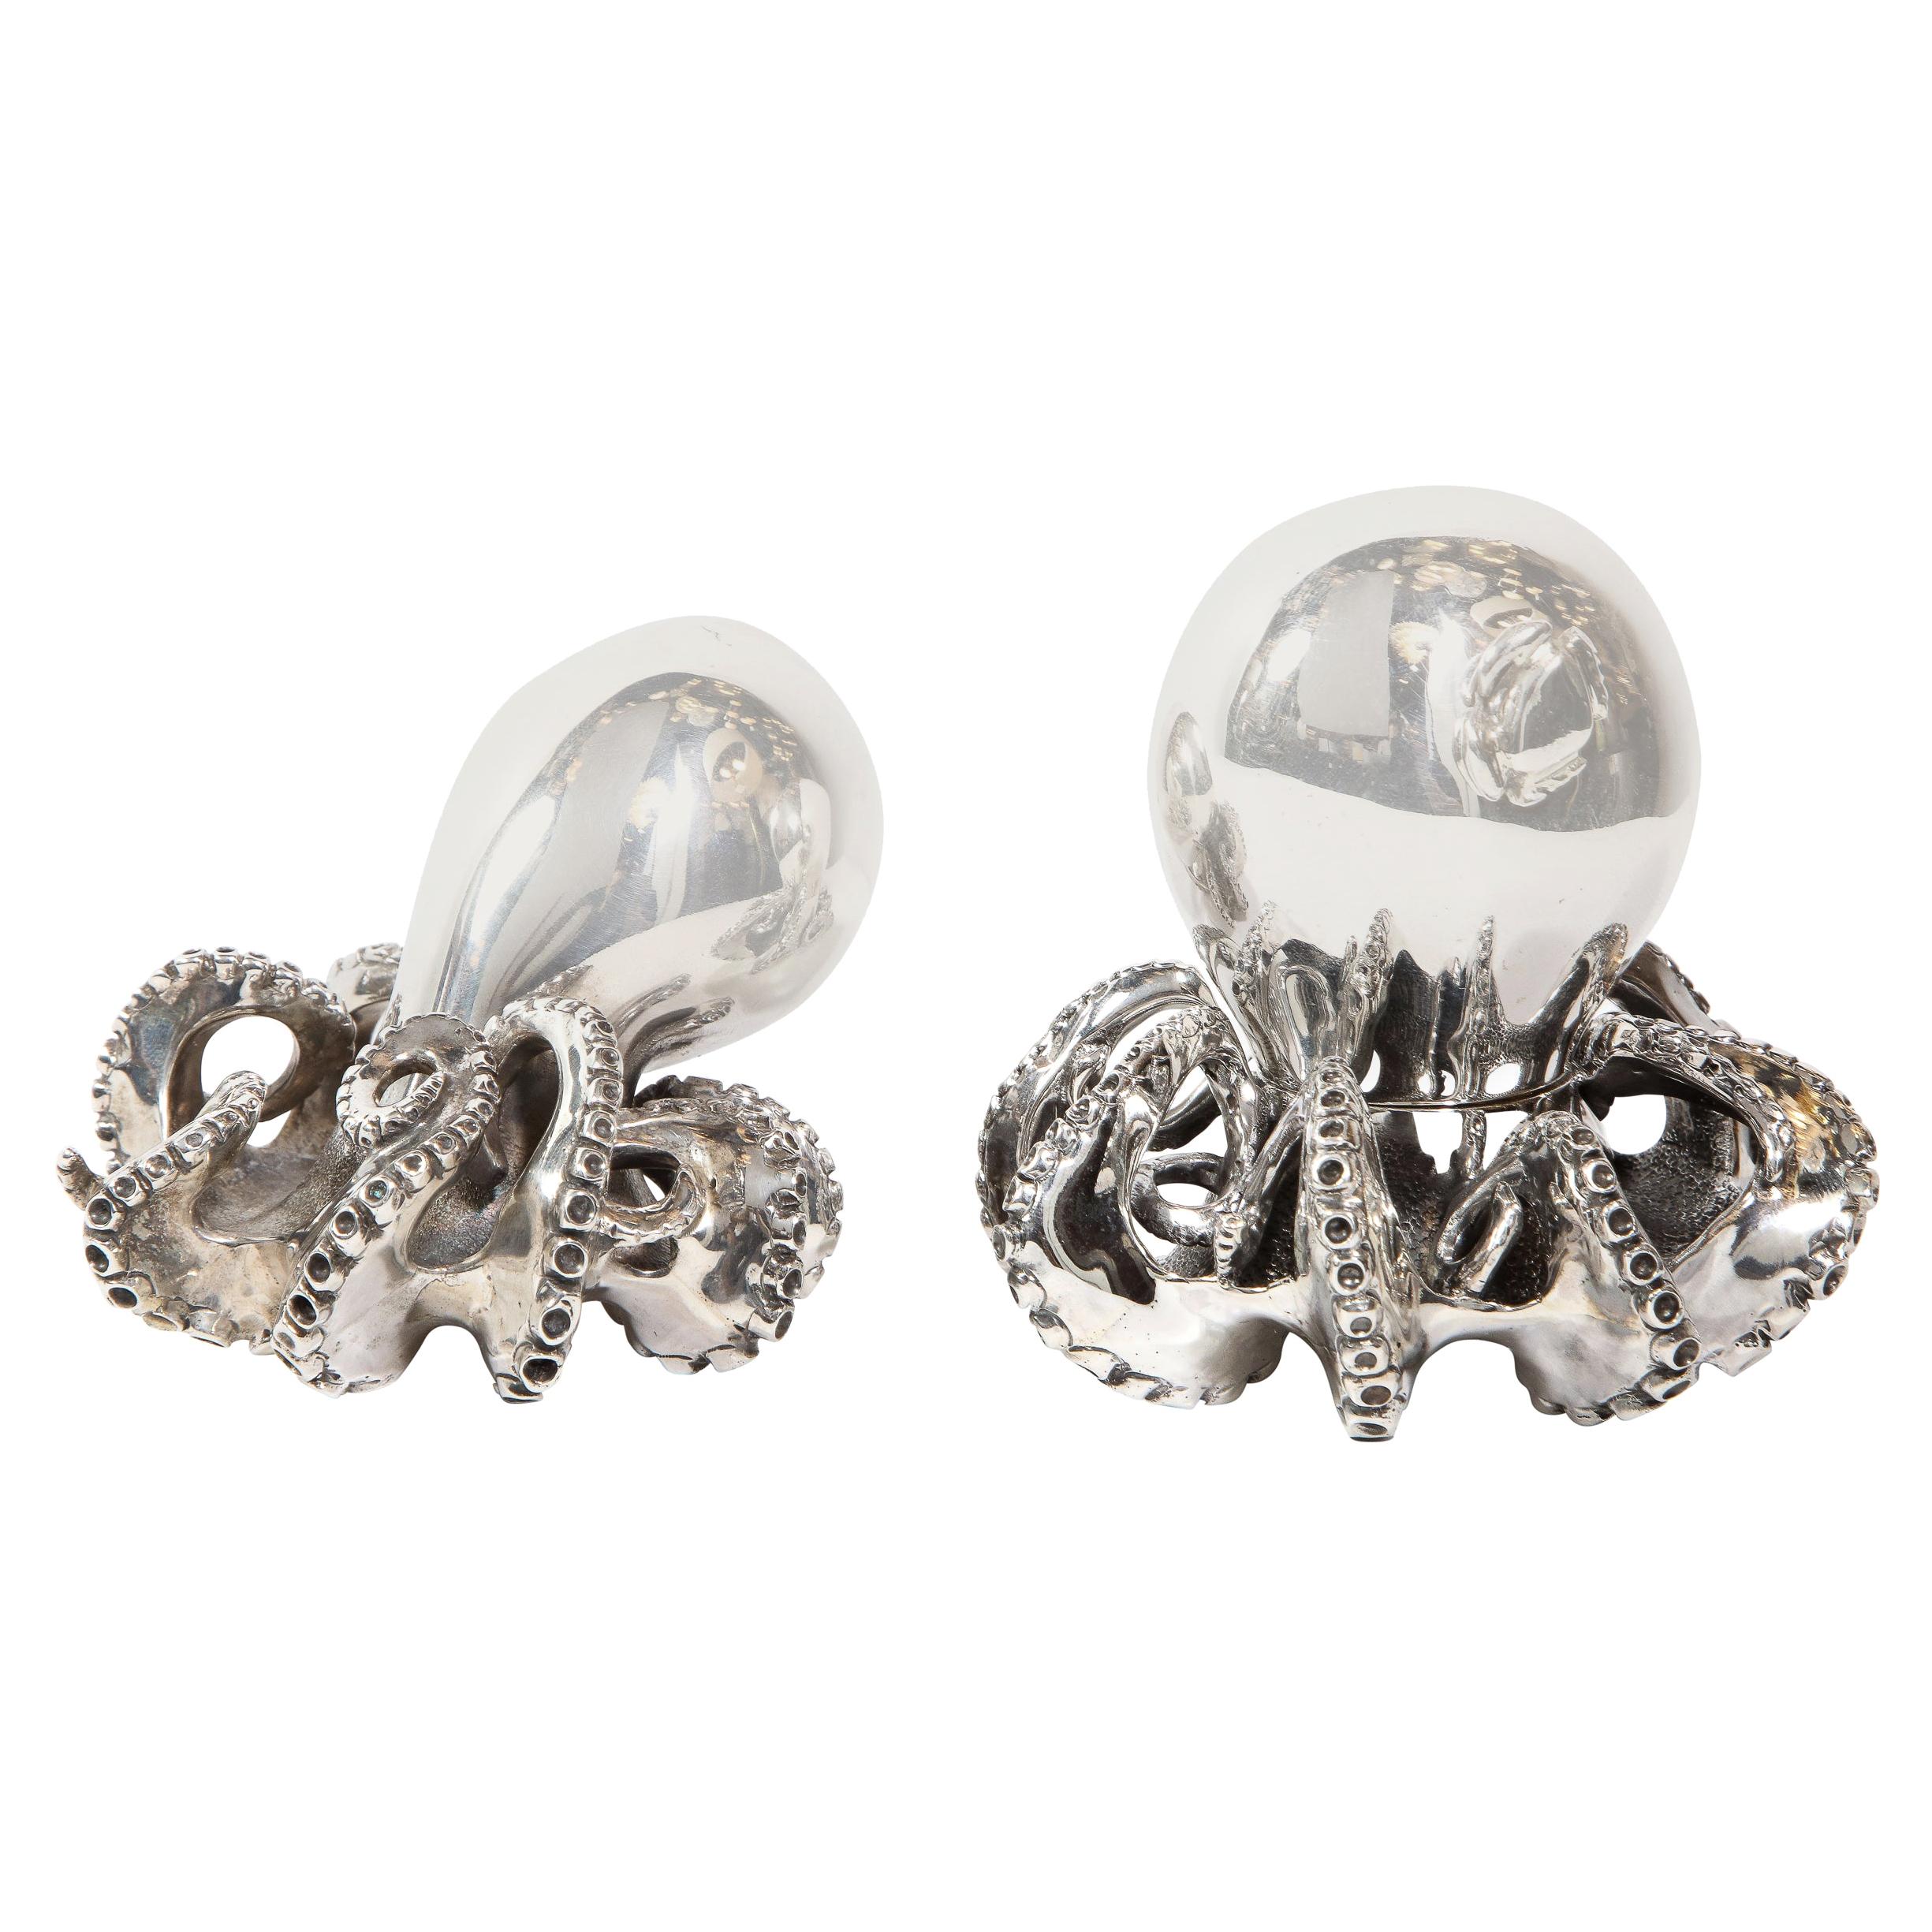 Handcrafted Sterling Silver Octopus Salt Shaker and Pepper Mill by Missiaglia